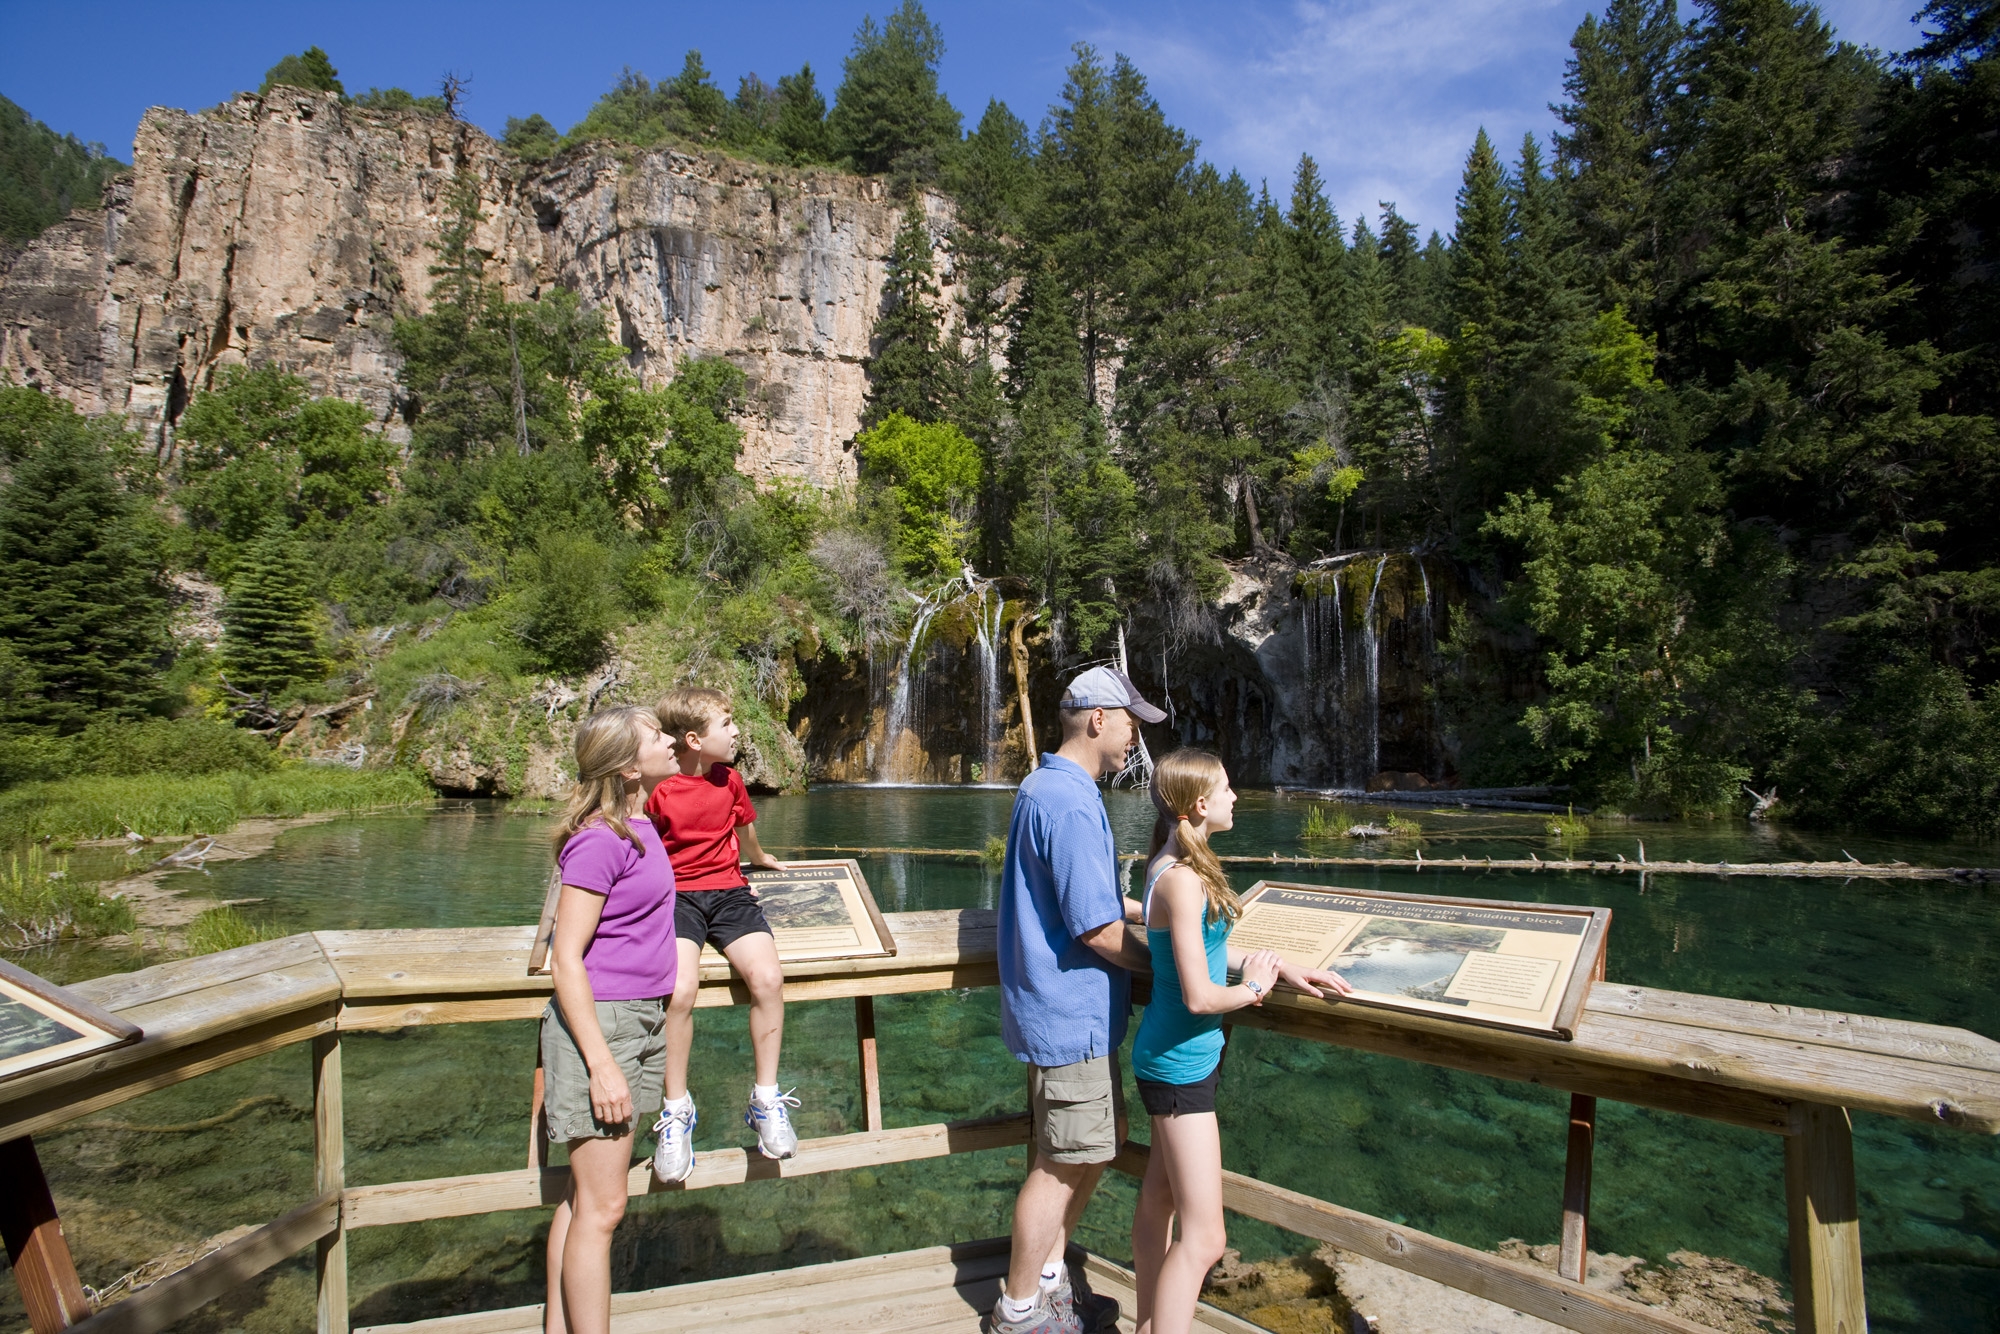 Hanging Lake is one of Glenwood Springs' most popular day hikes